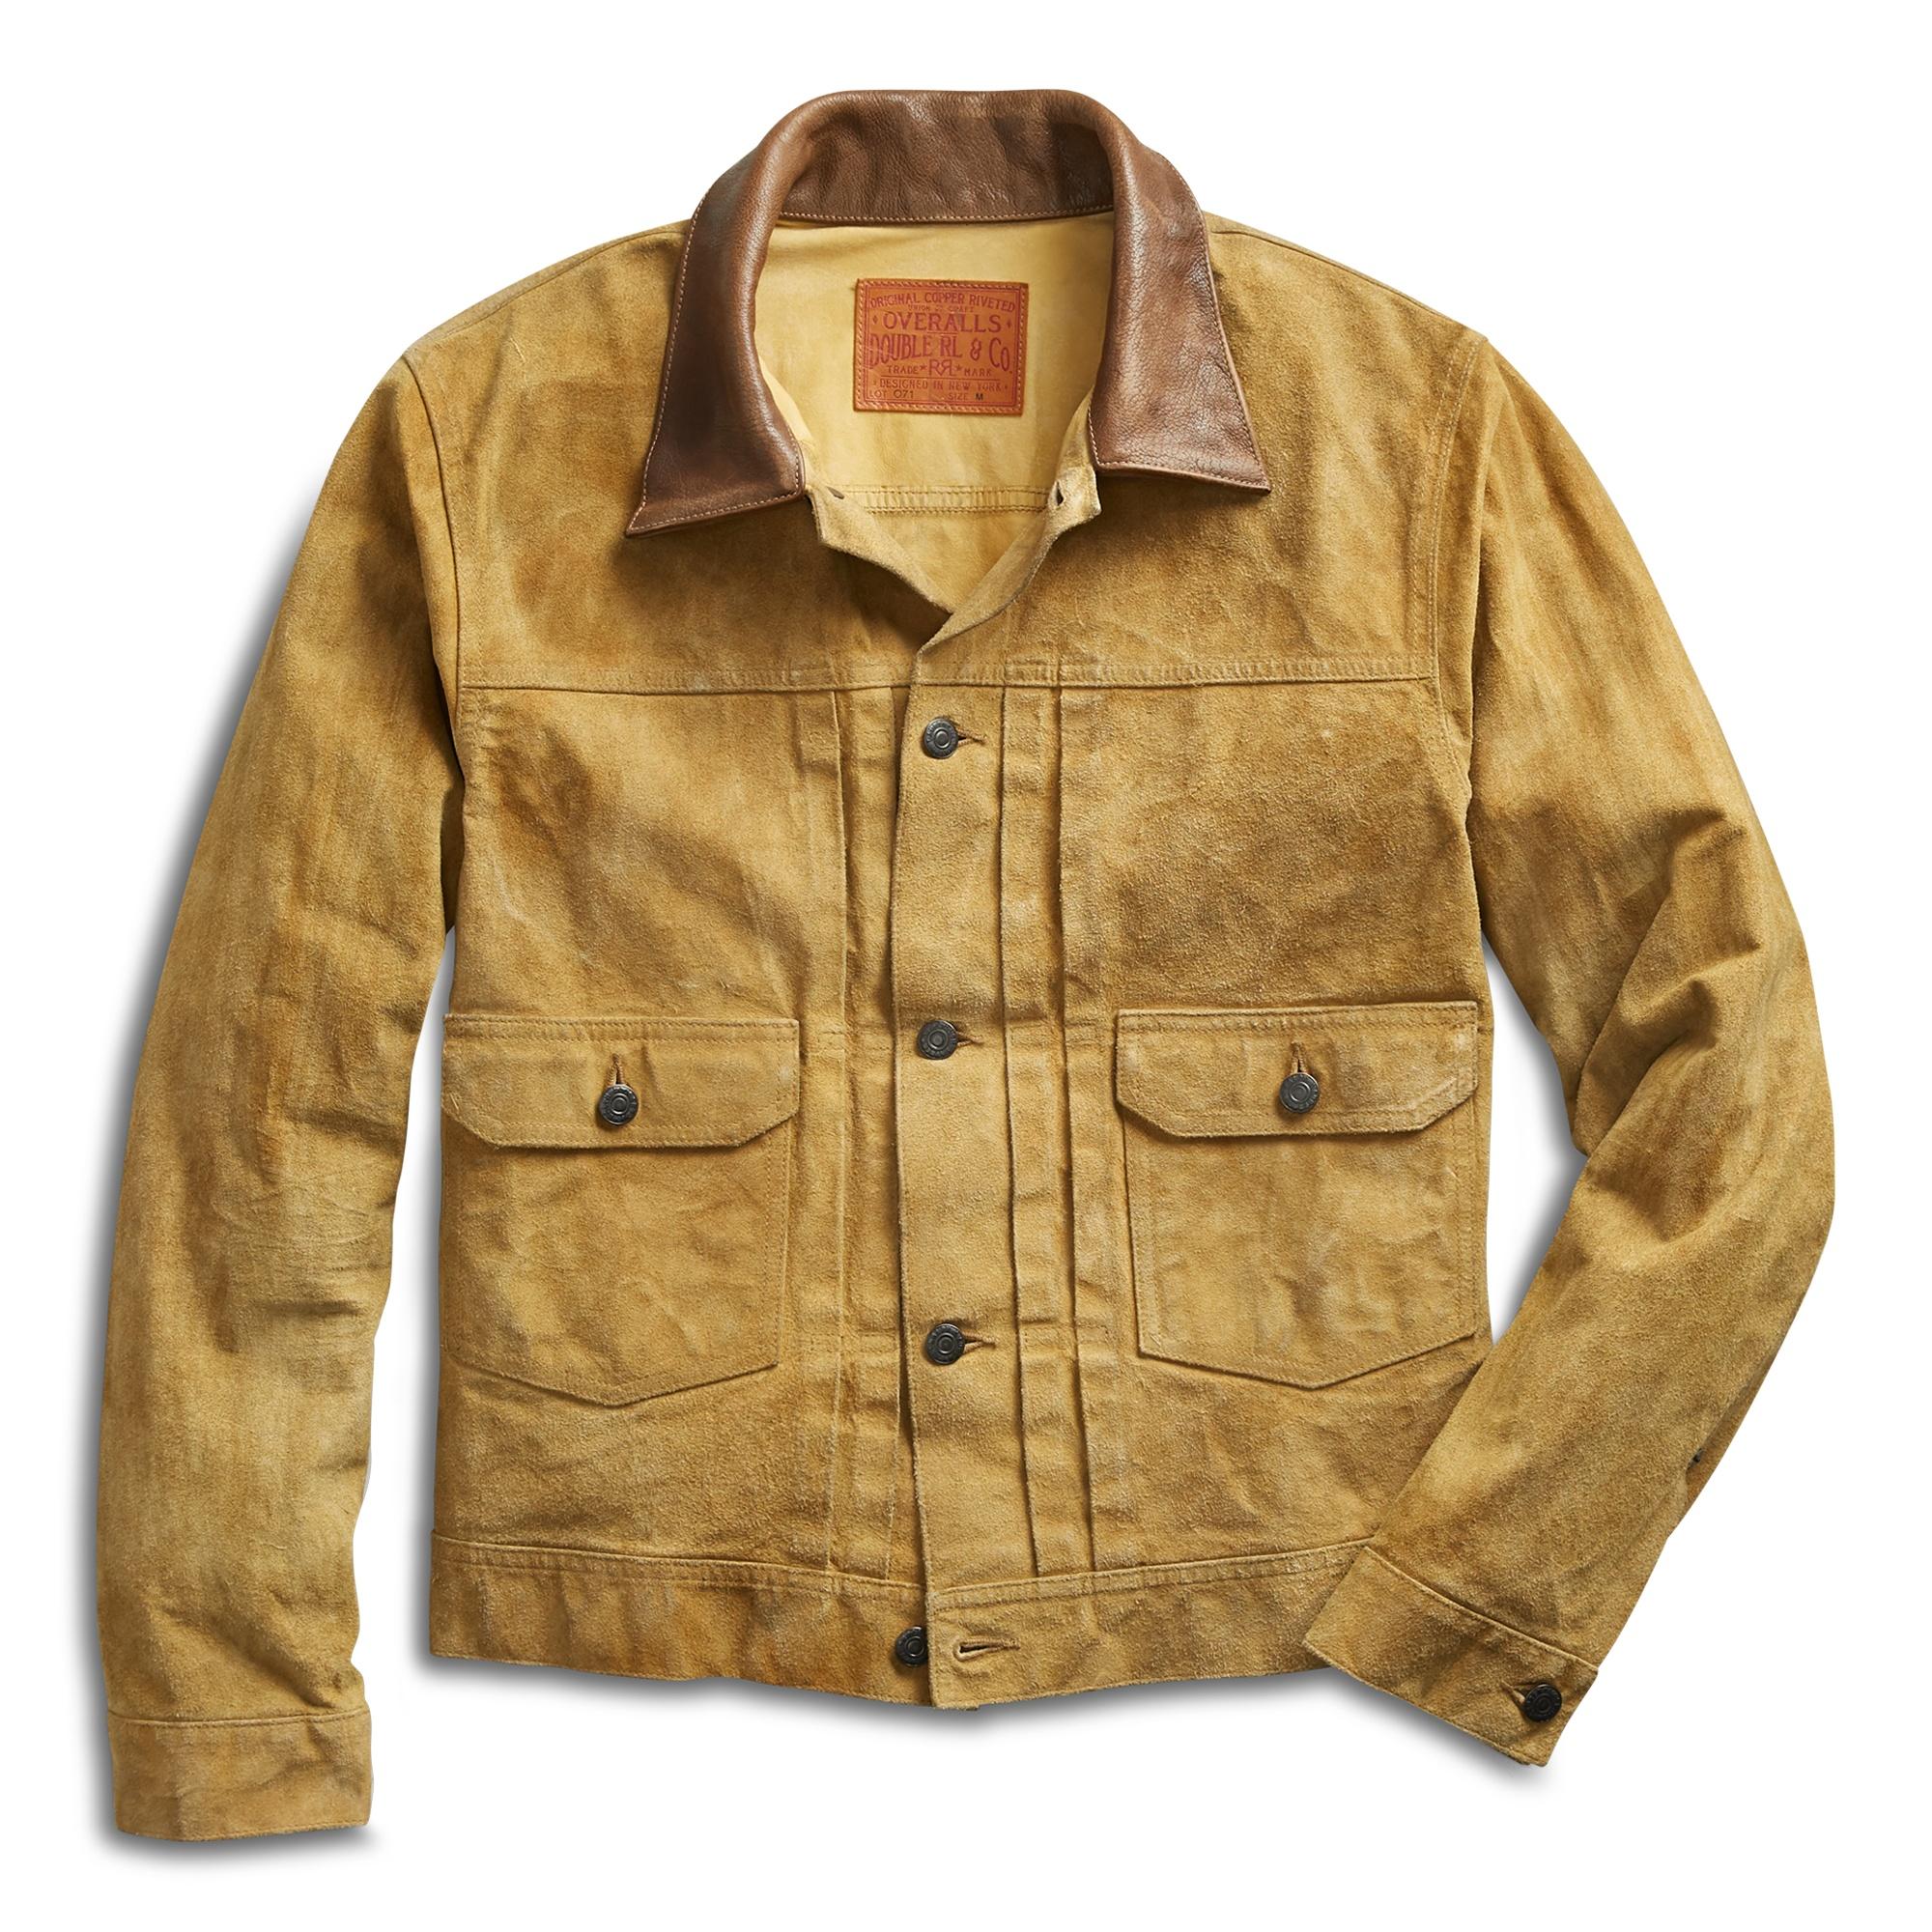 RRL Roughout-suede Jacket in Tan (Brown) for Men - Lyst